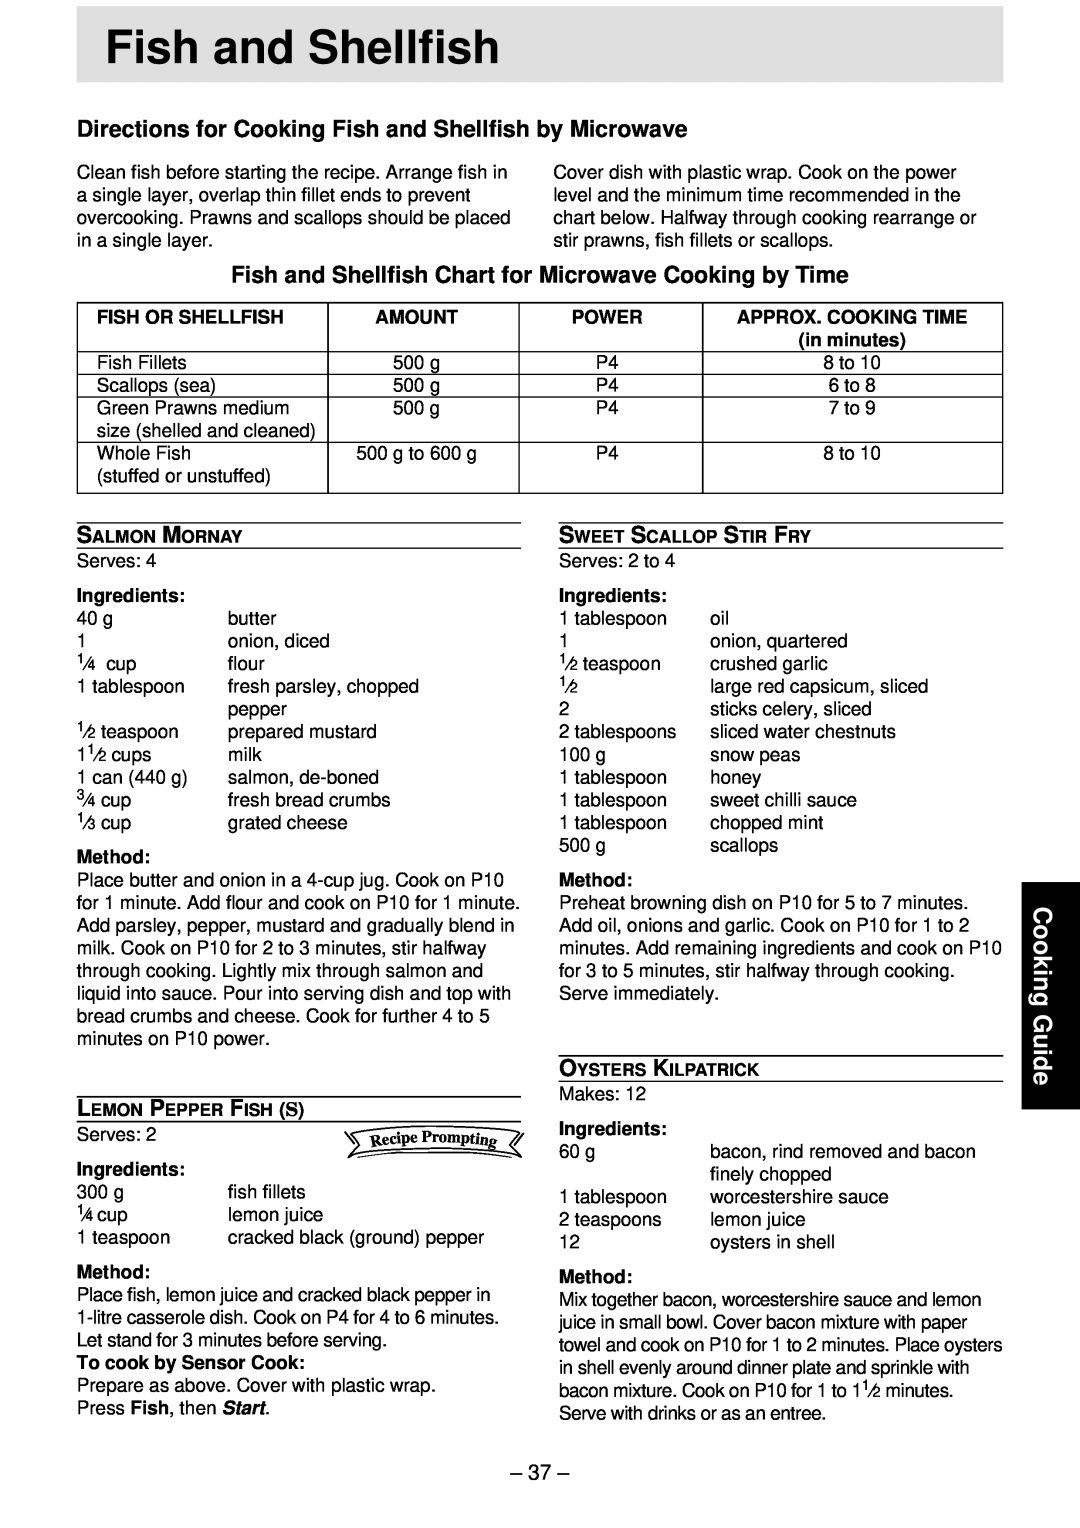 Panasonic NN-T791, NN-S761, NN-S781 manual Cooking Guide, Directions for Cooking Fish and Shellfish by Microwave 